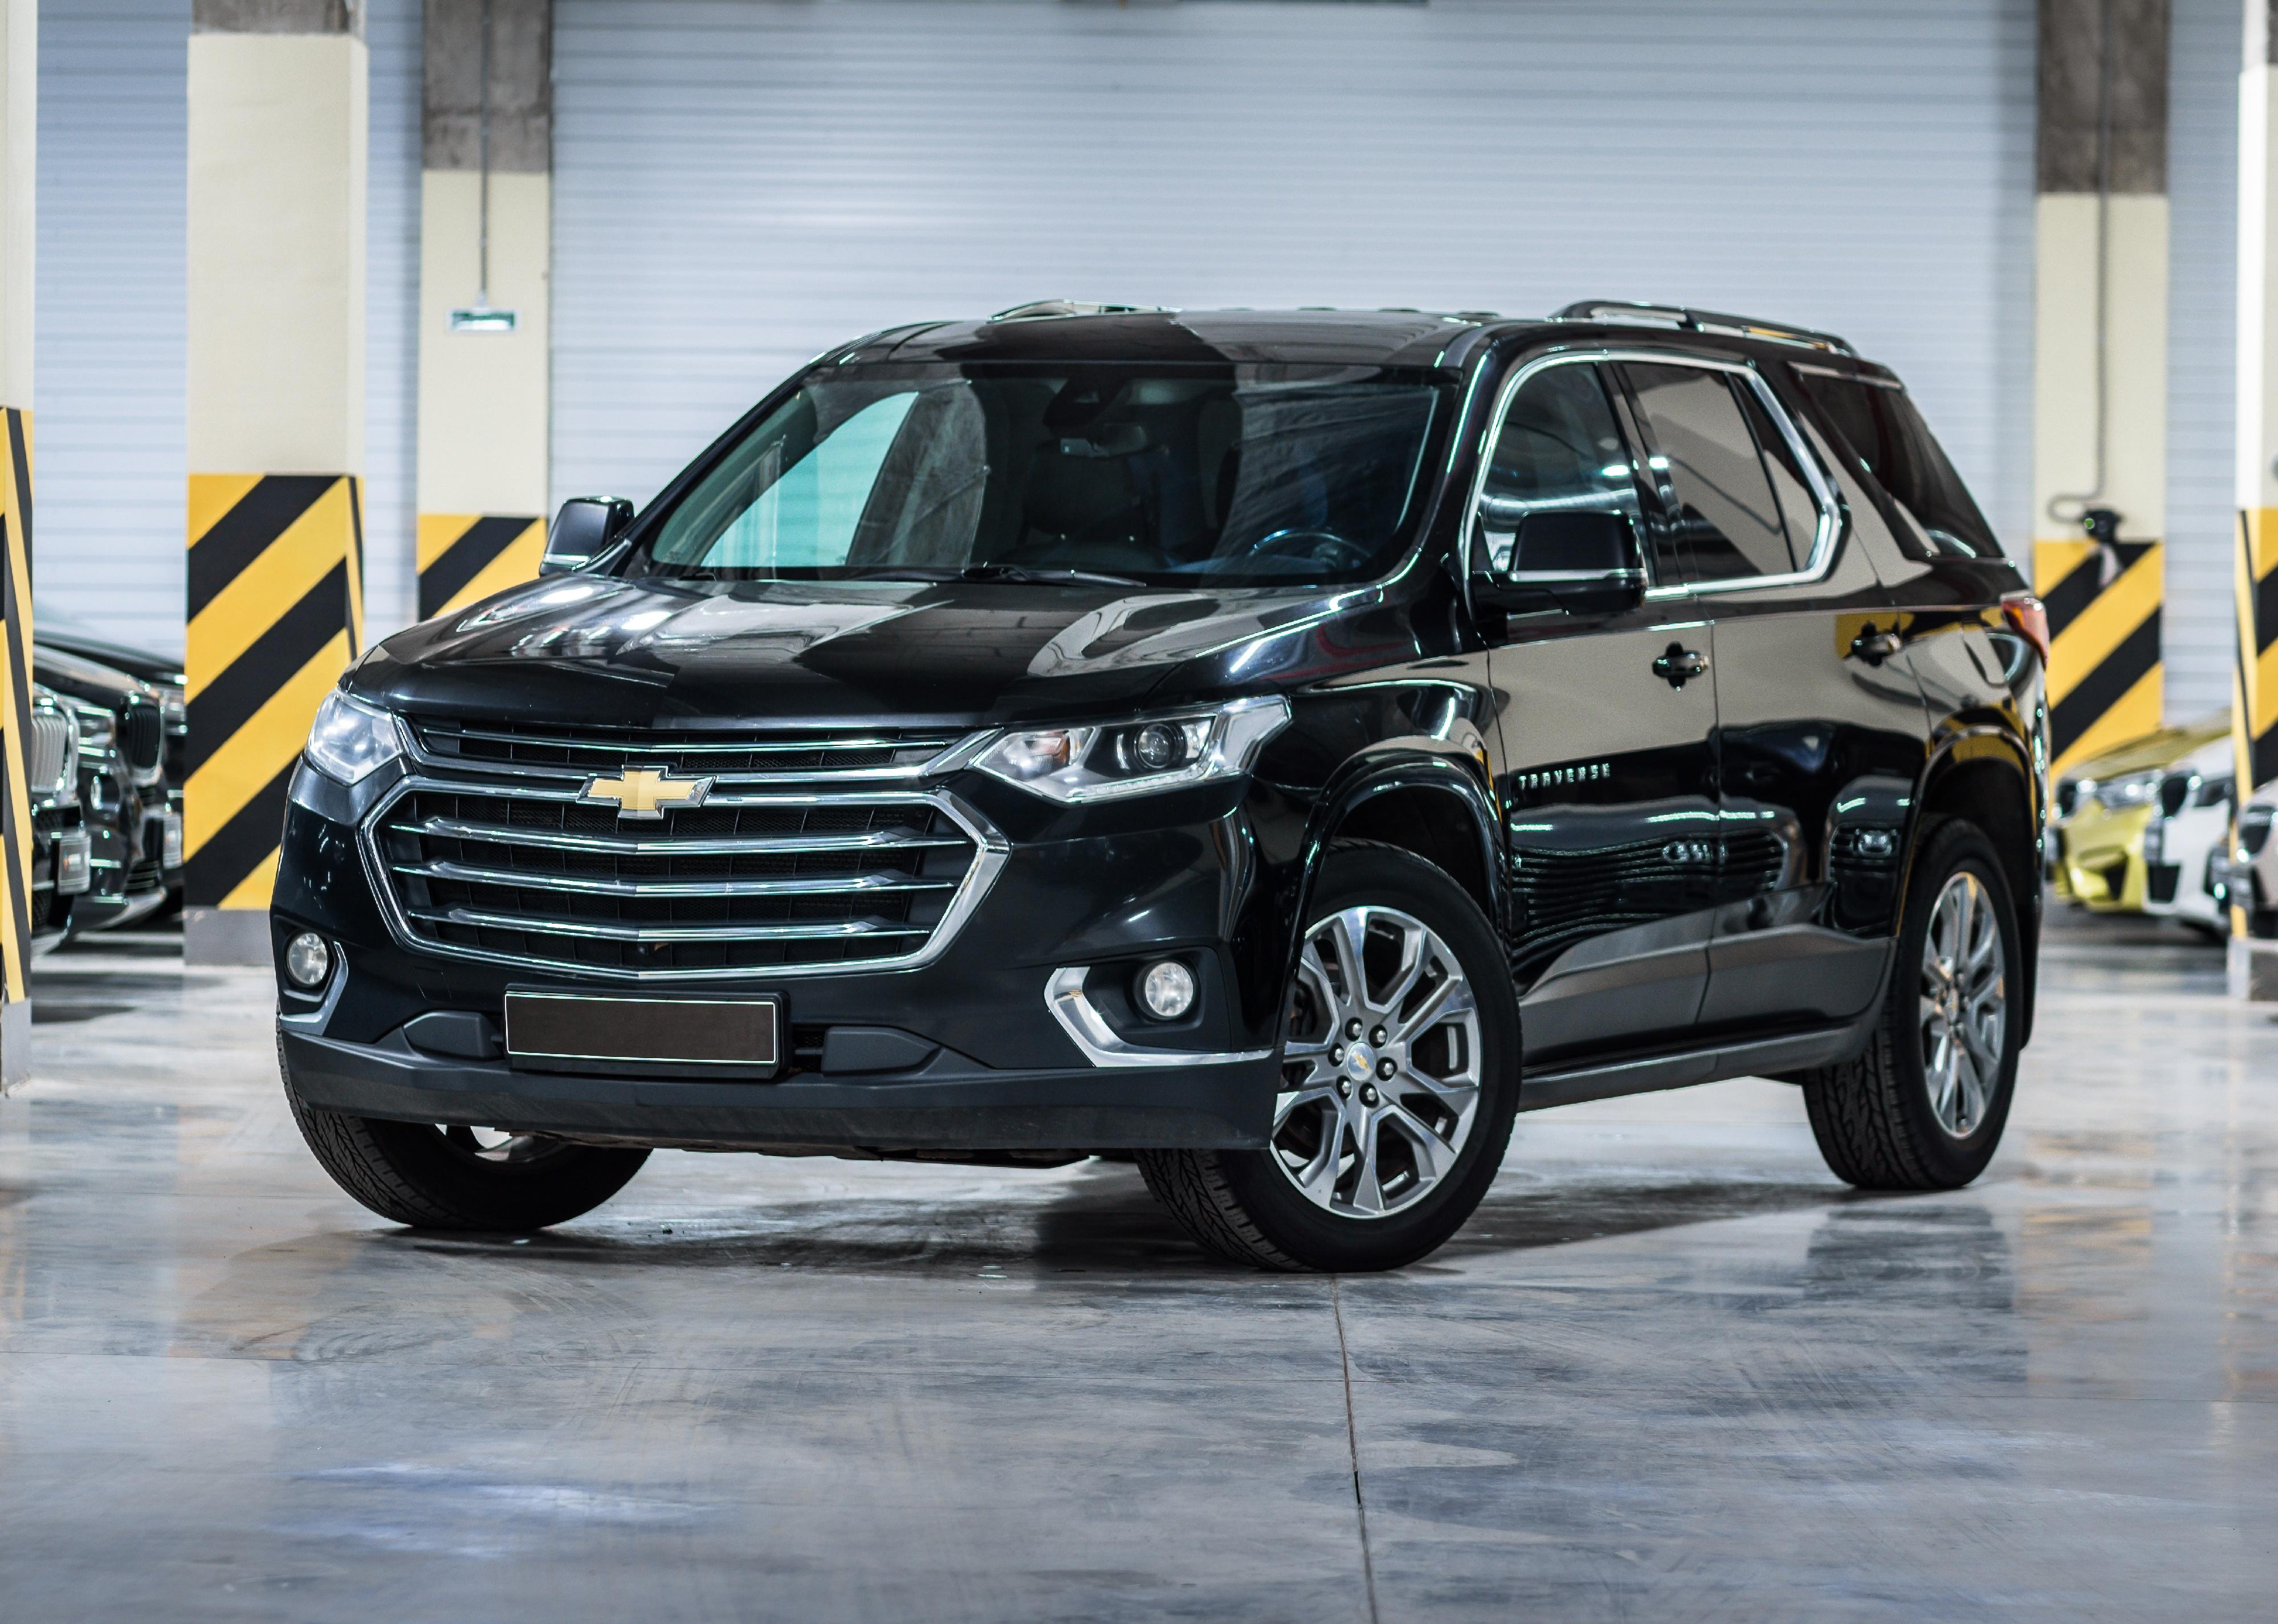 Chevrolet Traverse II front view.